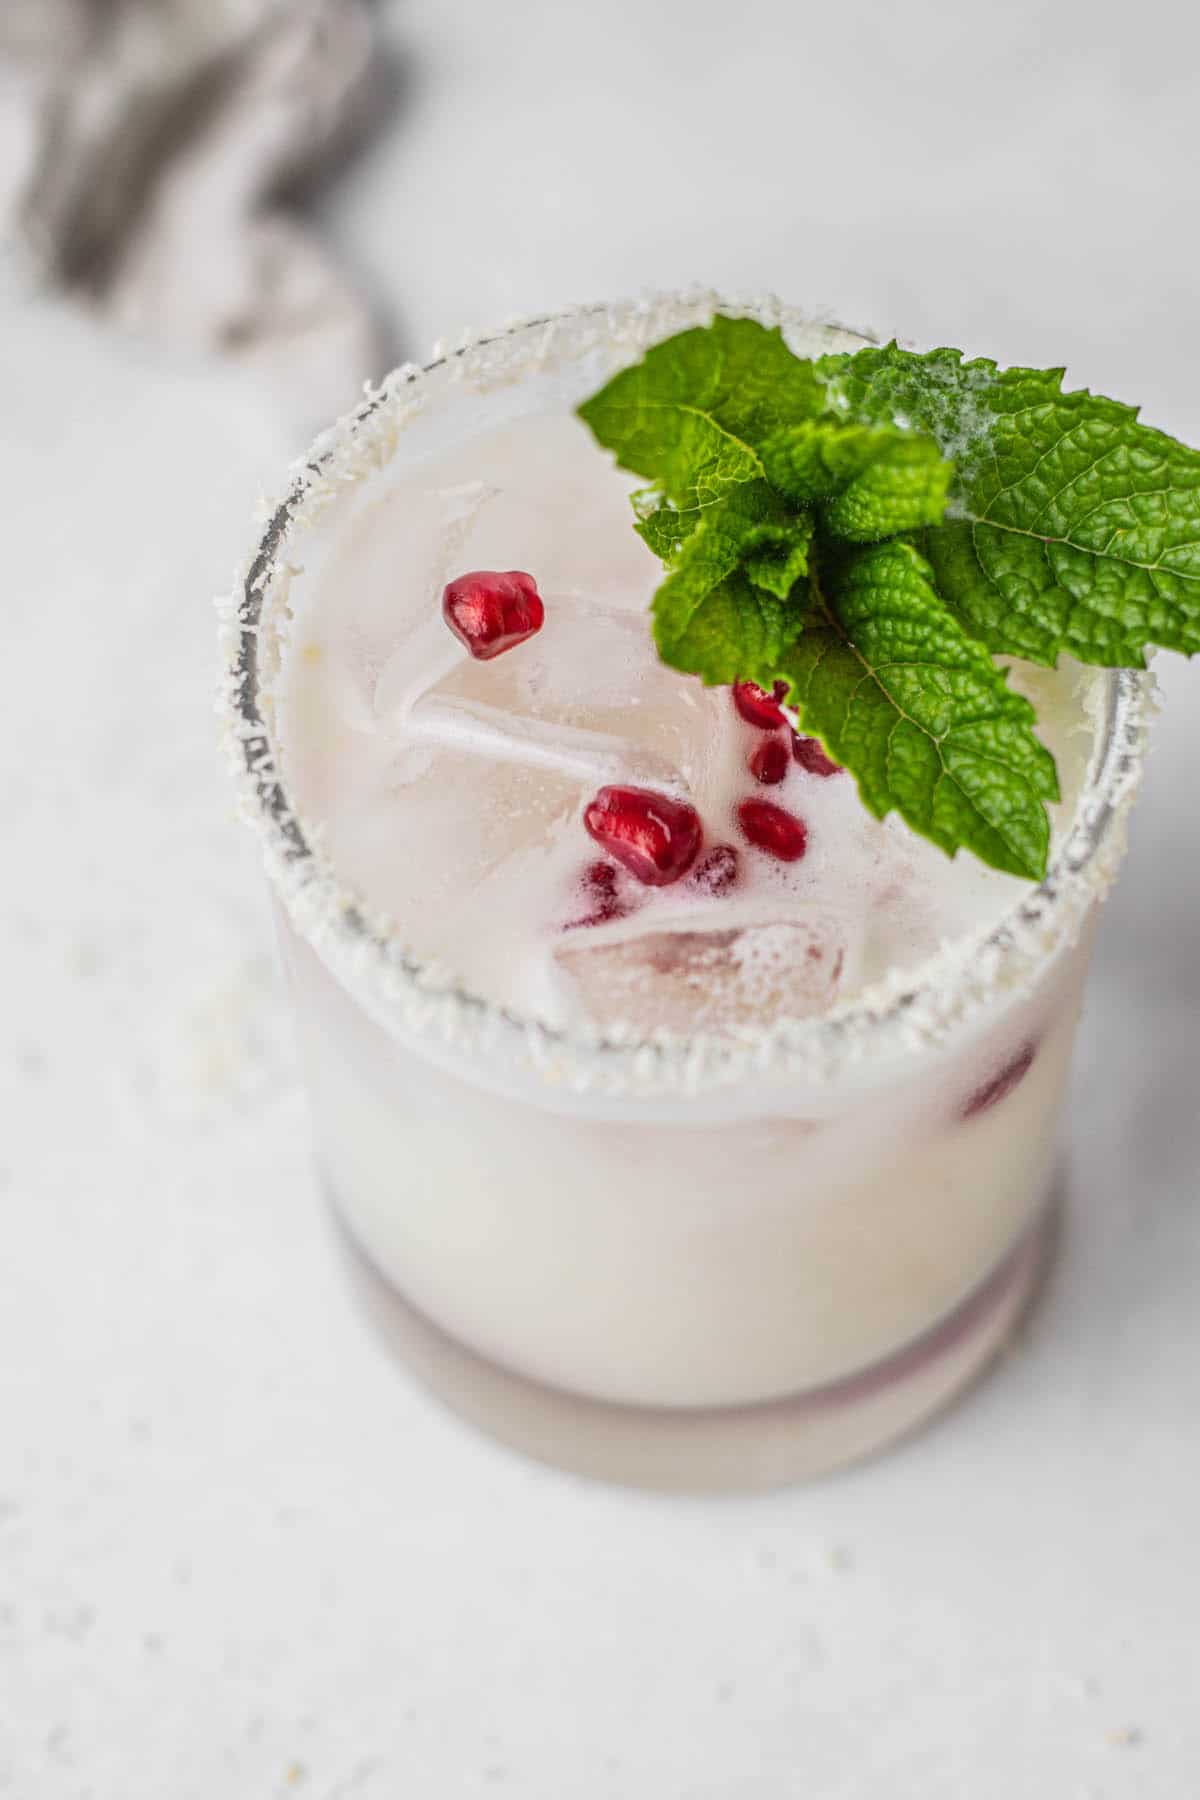 coconut rimmed glass filled with white drink, red pomegranate seeds and mint leaves.